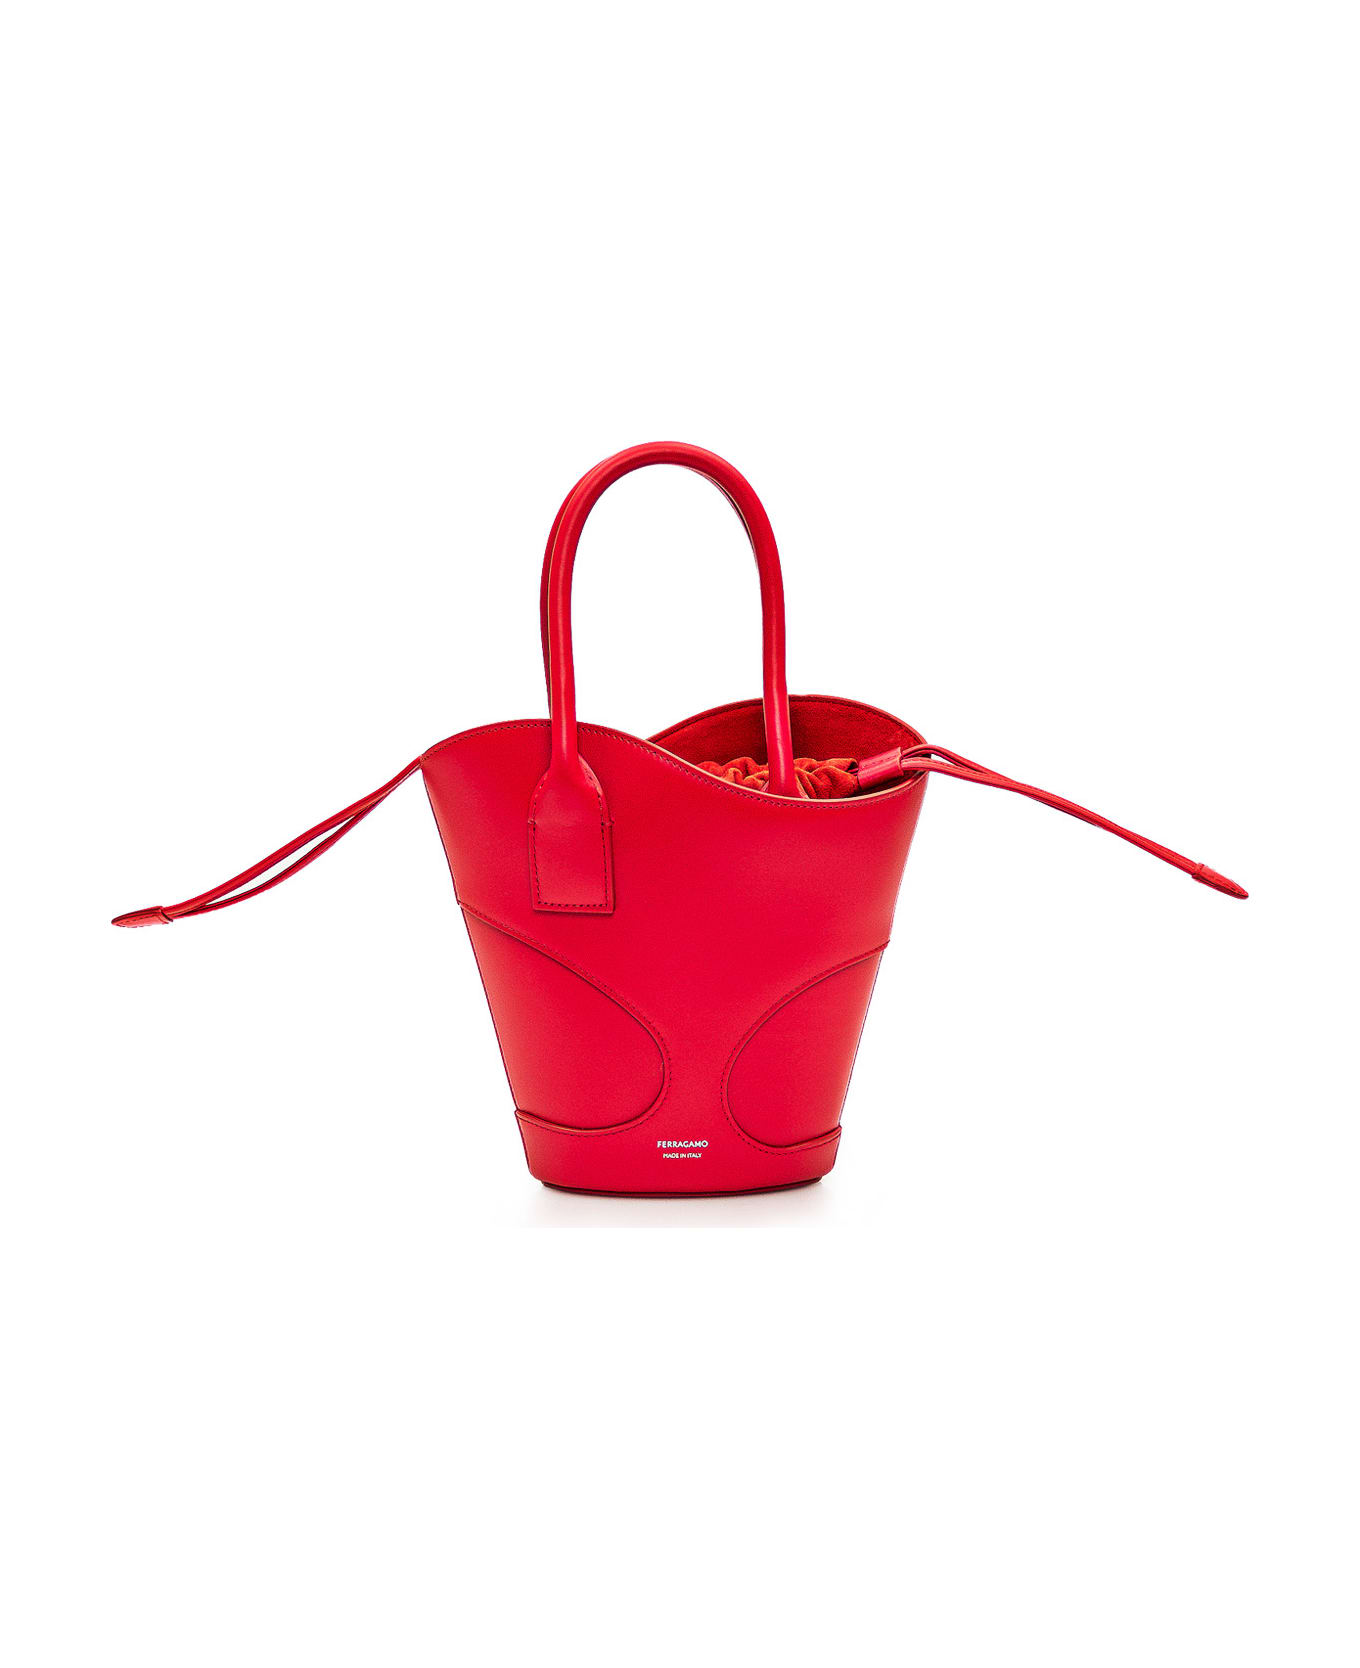 Ferragamo Tote Bag With Cut Out (s) - FLAME RED トートバッグ